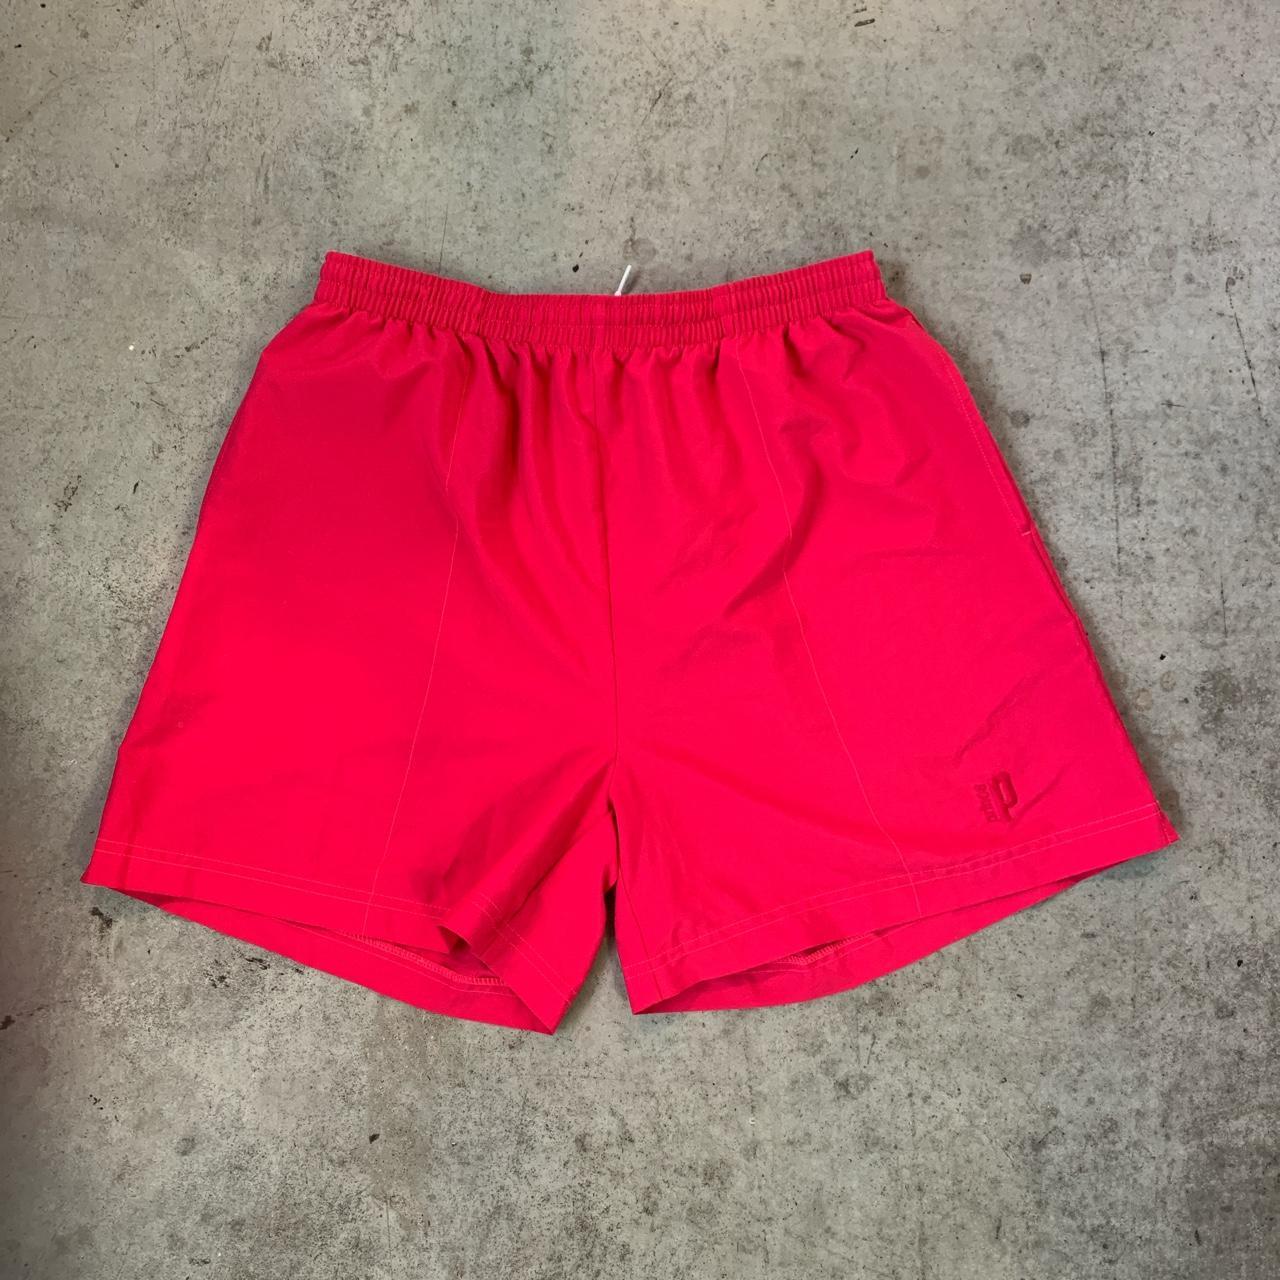 Product Image 1 - Vintage Prince pink shorts 
Has